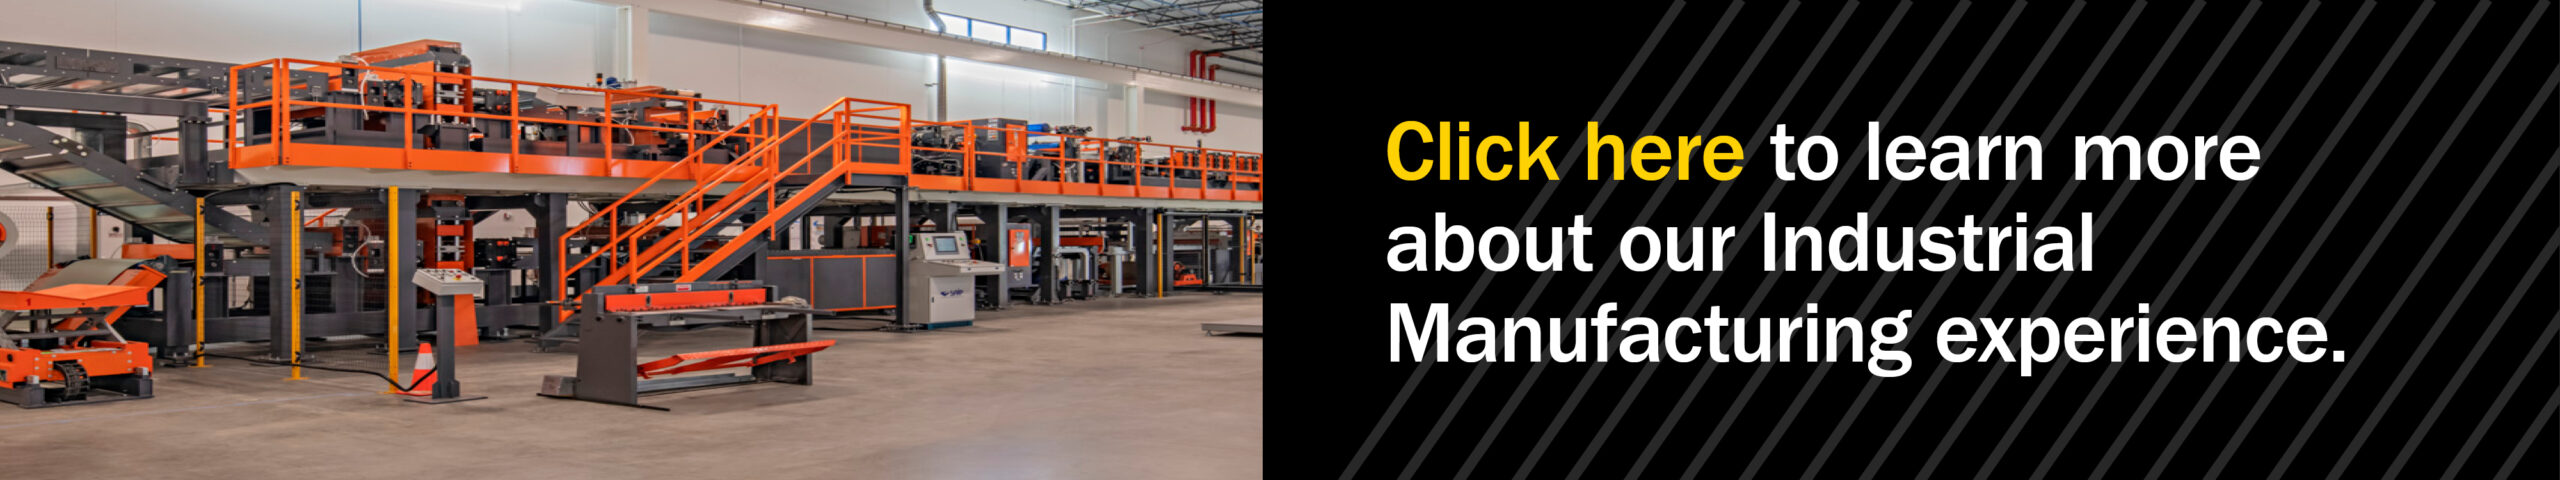 Learn more about Industrial Manufacturing expertise at A M King.